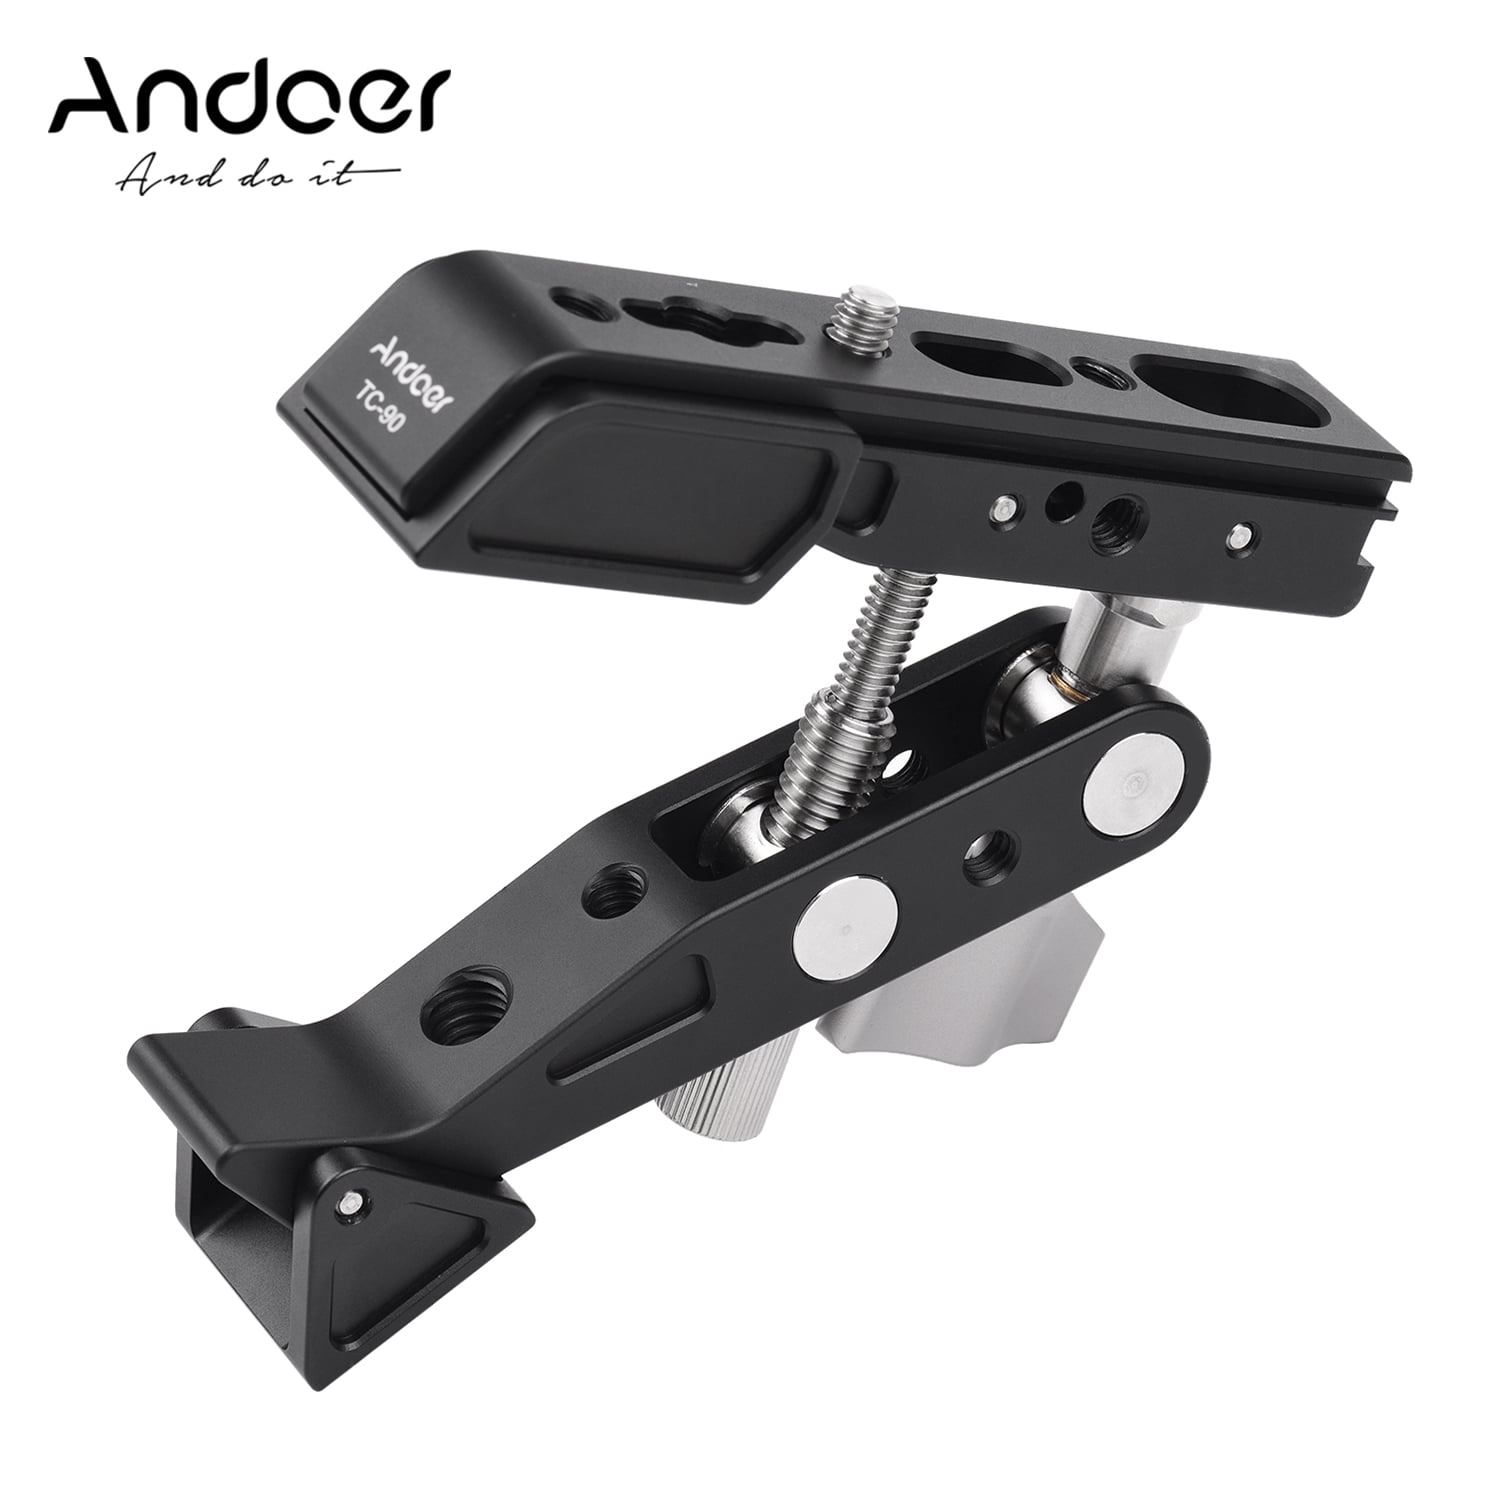 Andoer Photo Studio Heavy Duty Metal Clamp Holder with 1/4inch 3/8inch Screw Light Stand Attachment for Reflector